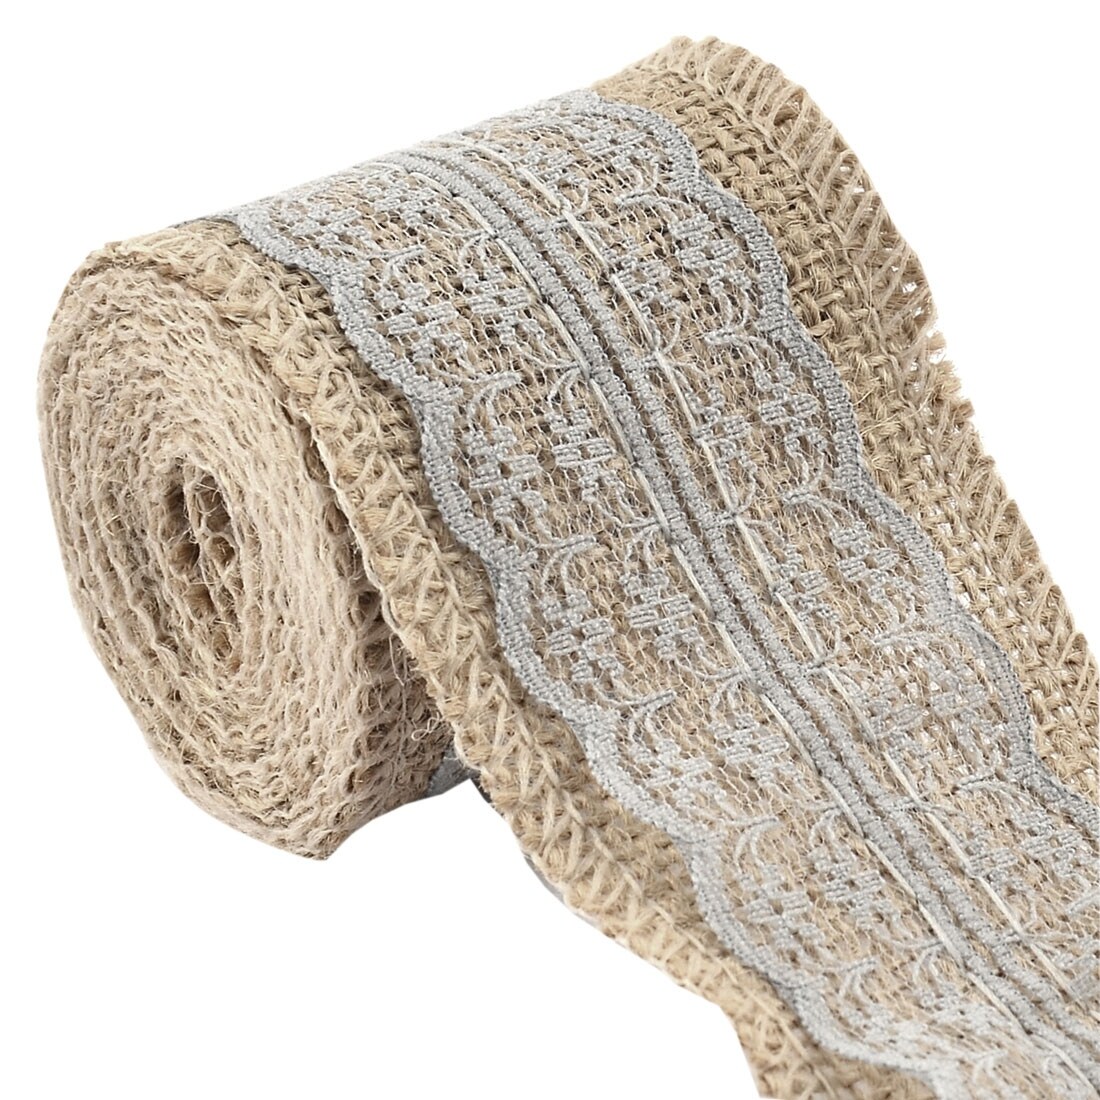 4 inch Red Burlap Ribbon with White Lace Edges - 5 Yards